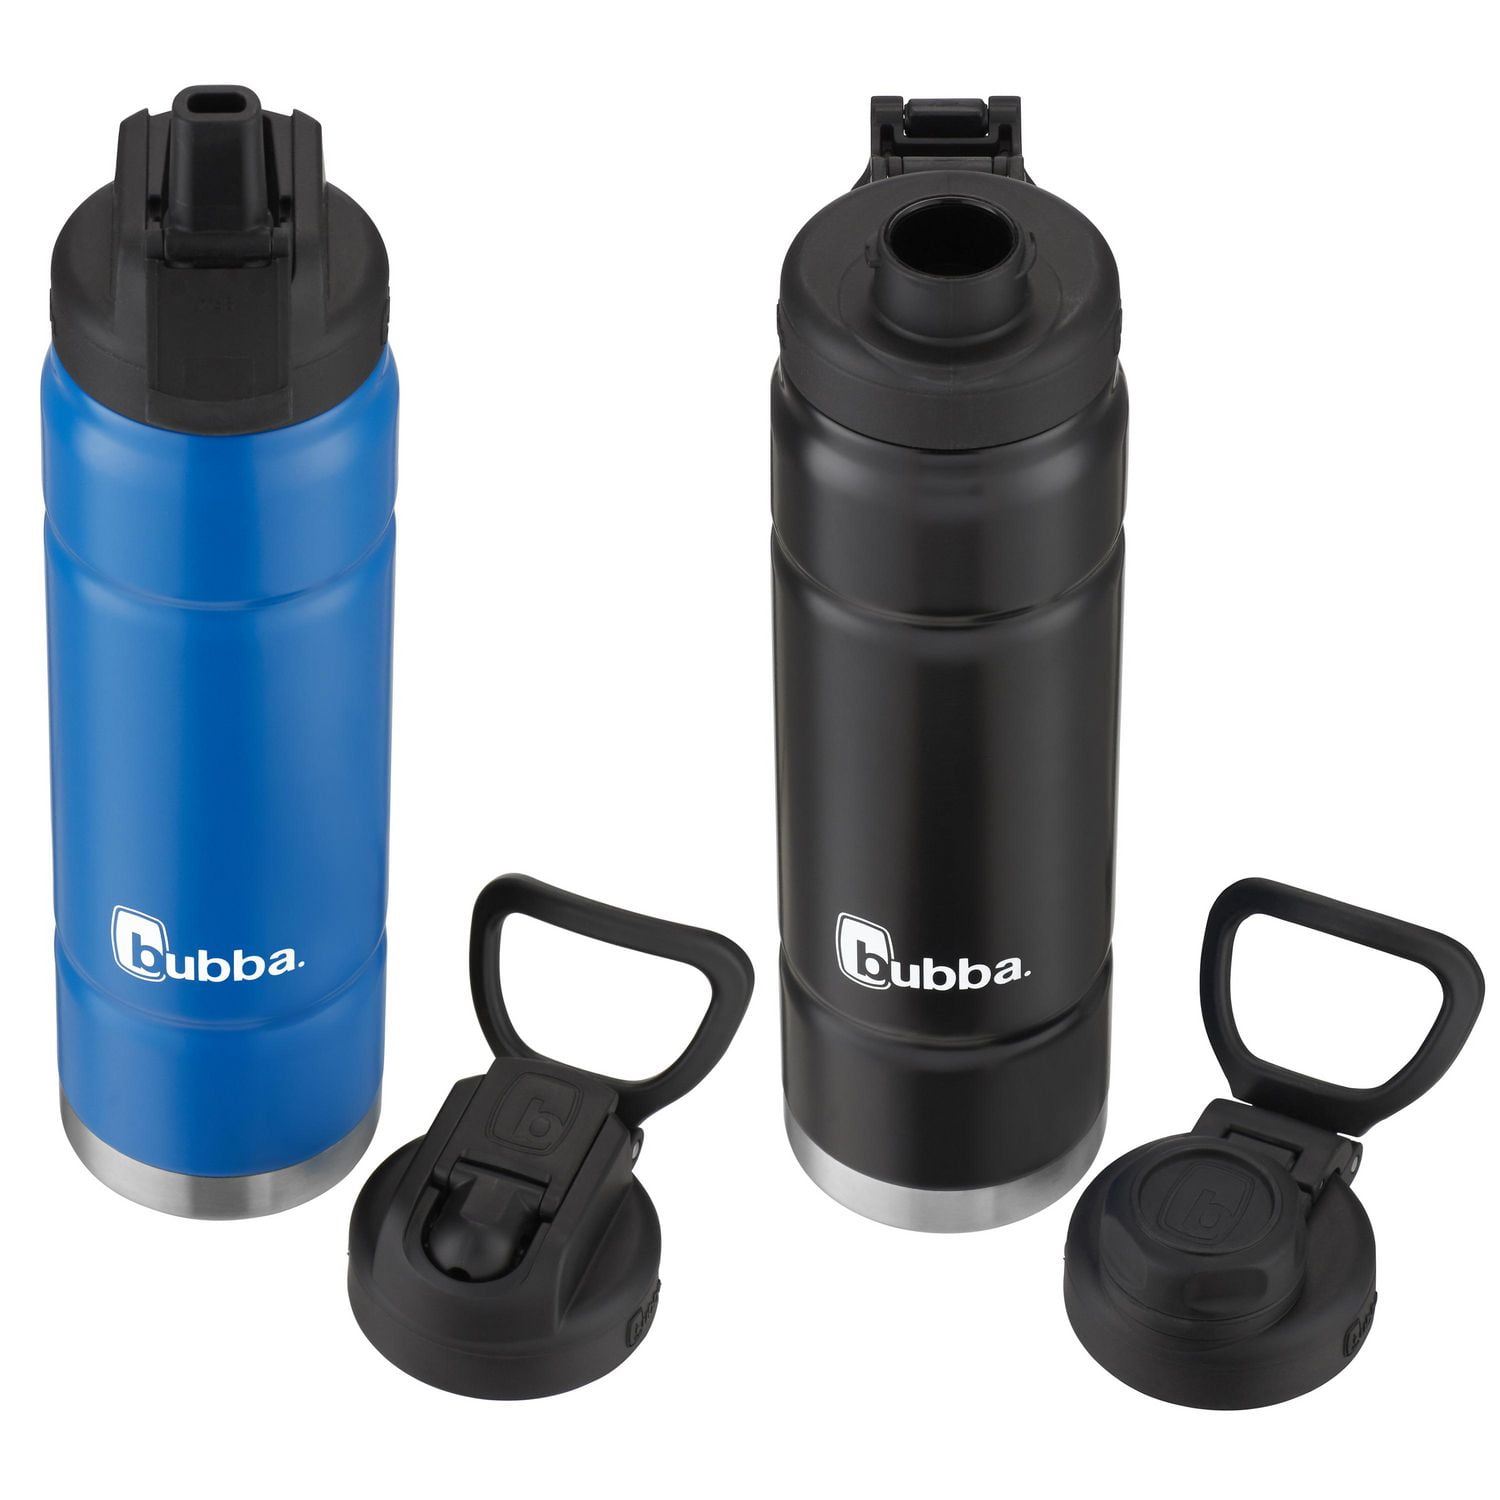 bubba Trailblazer Stainless Steel Water Bottles with Two Extra